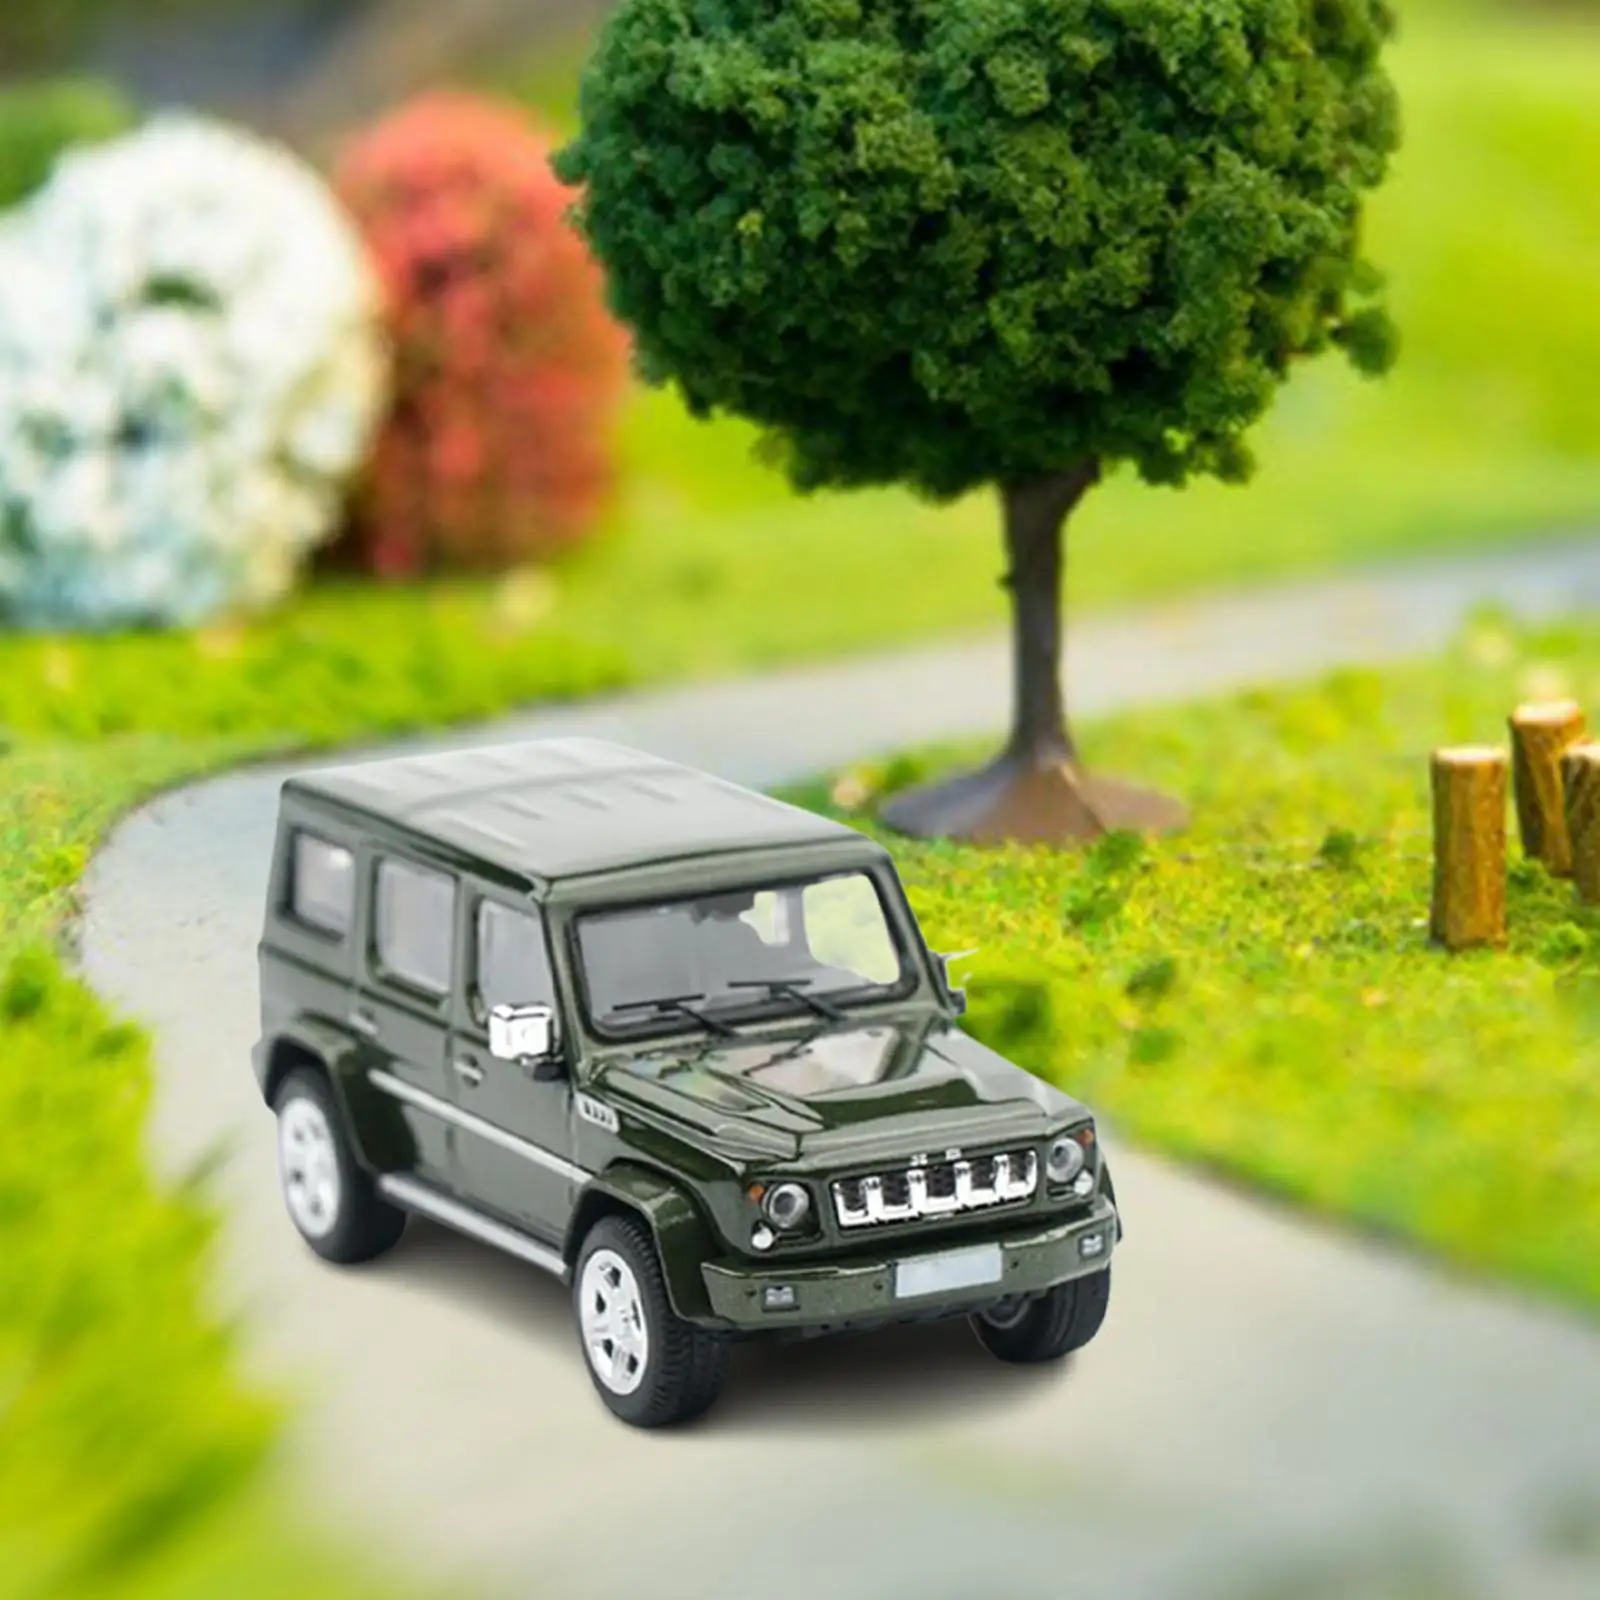 1/64 Racing Car Vehicles Diecast Toys Realistic Diorama Scenes for Micro Landscapes Photography Props Diorama Layout Decoration